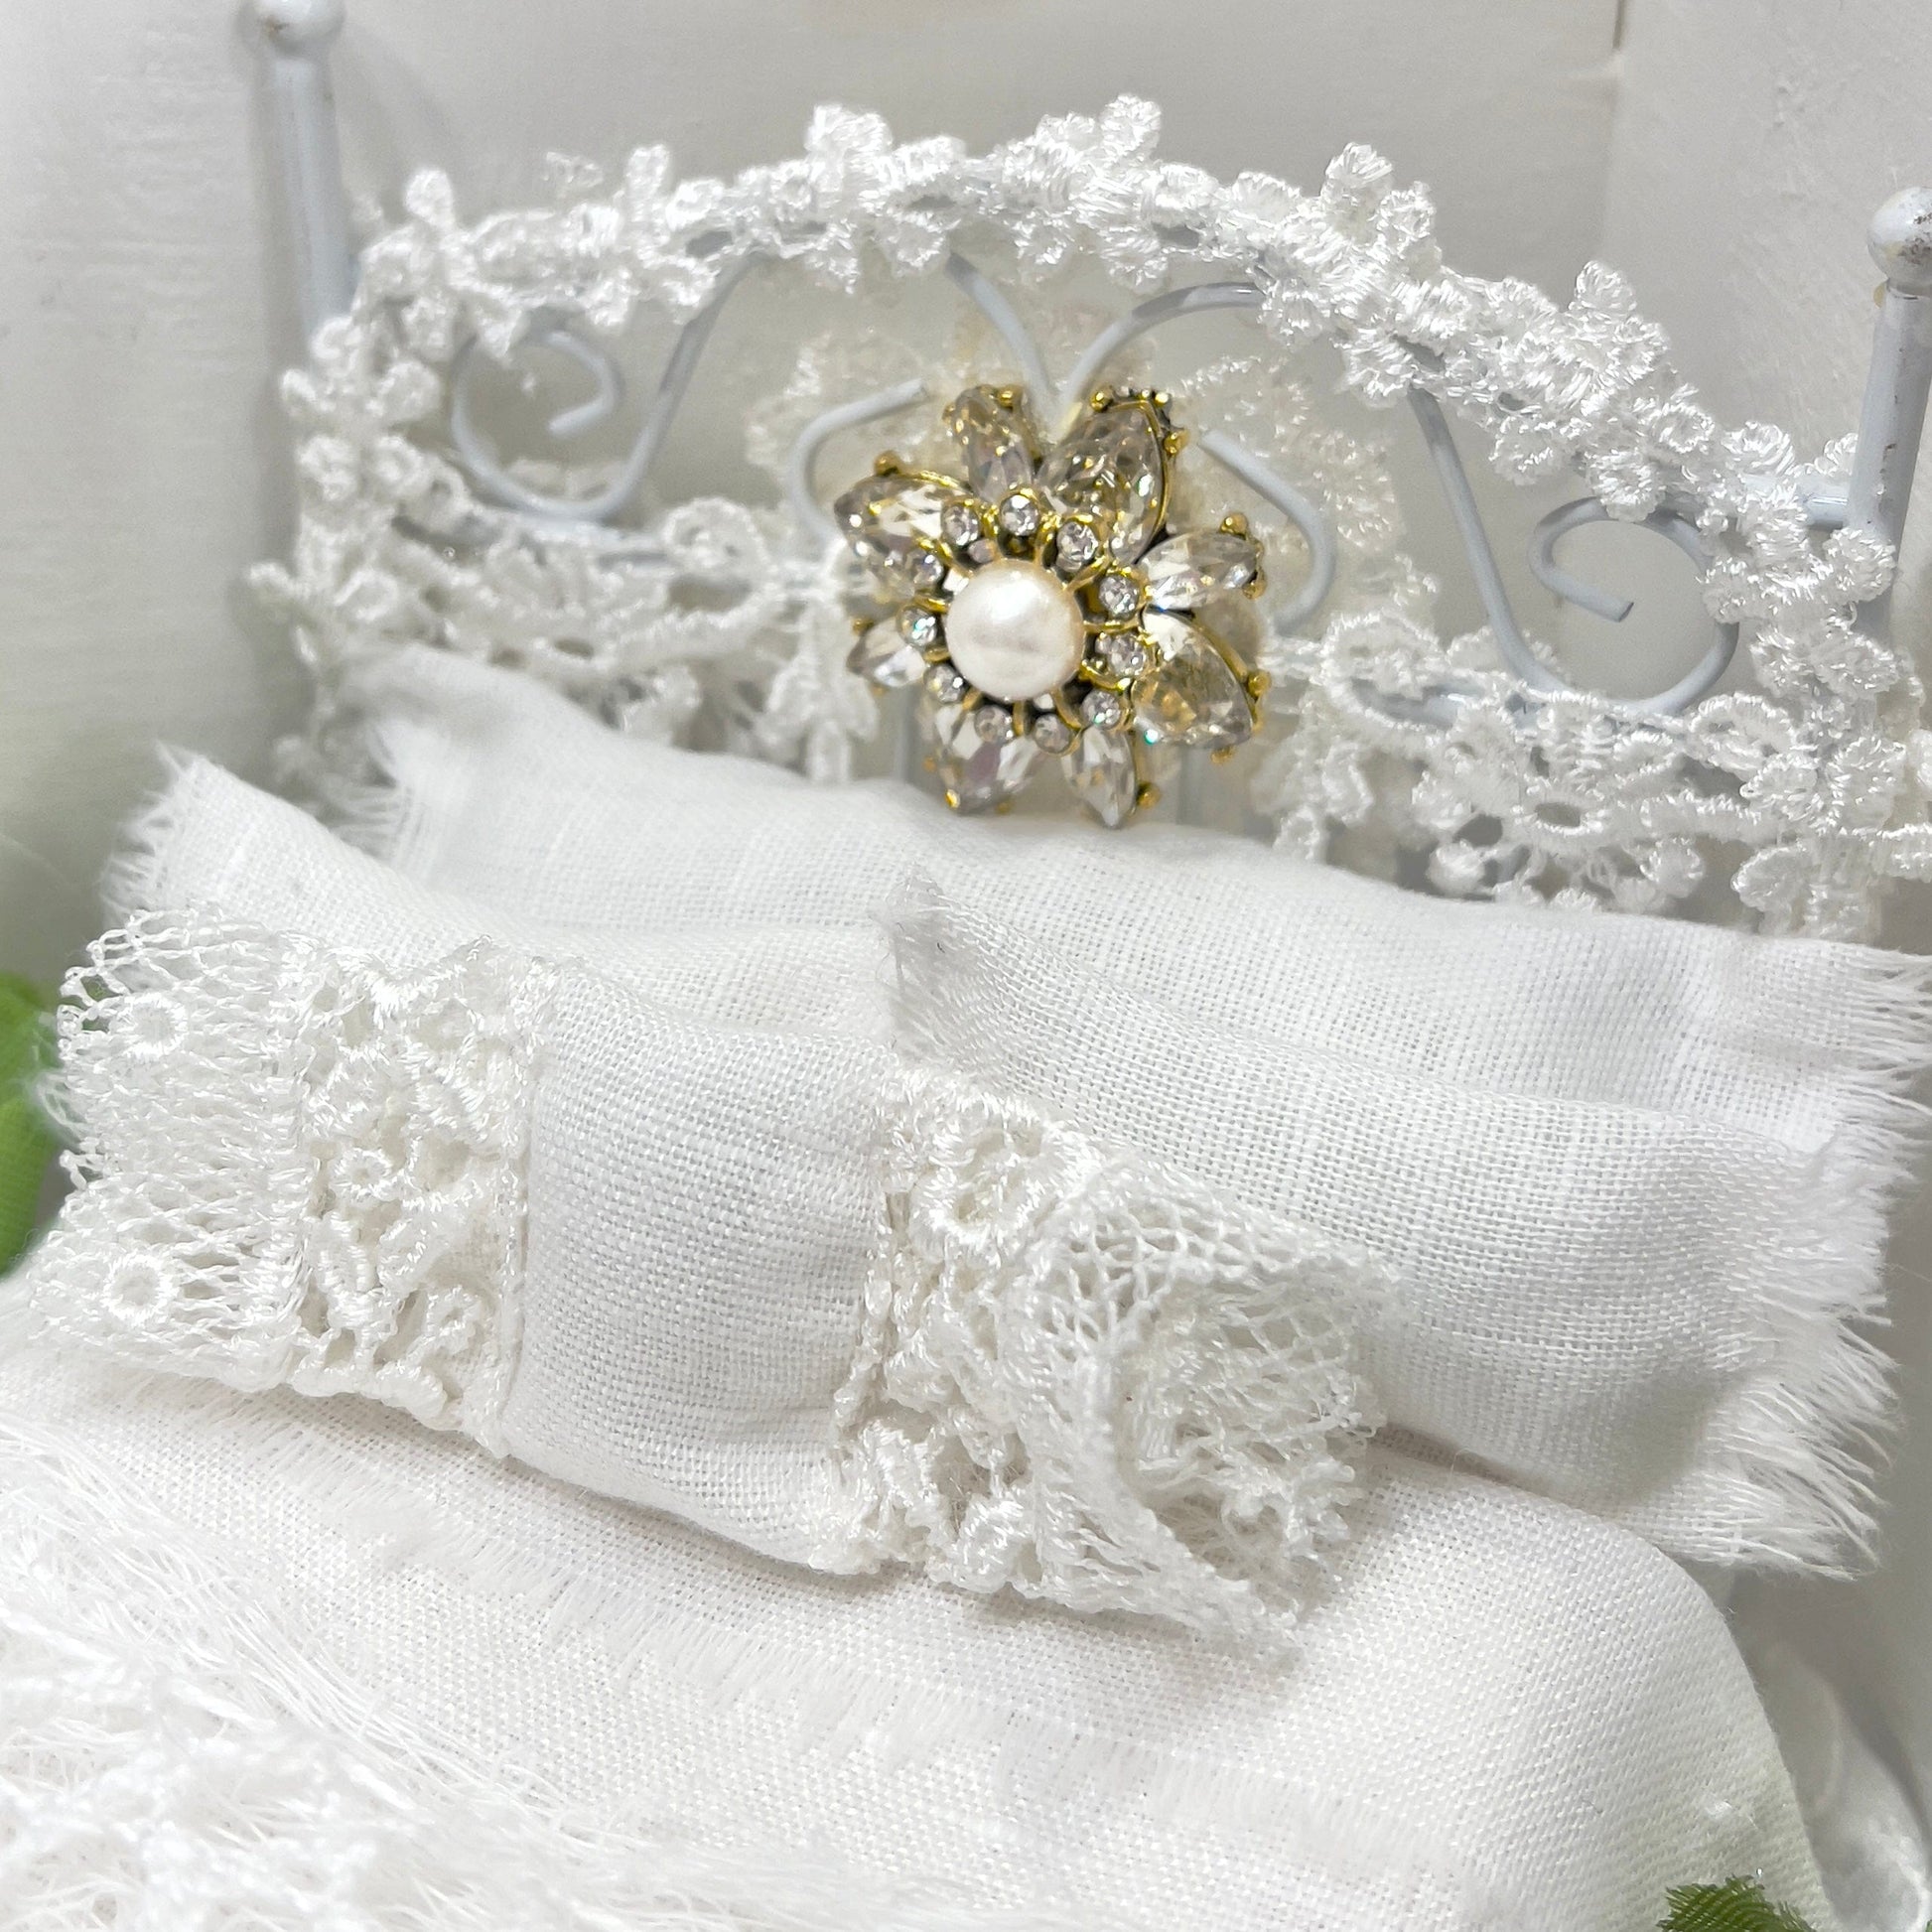 Chantallena Doll House Dressed Bed | White Cotwith Lace Accents | White Lace